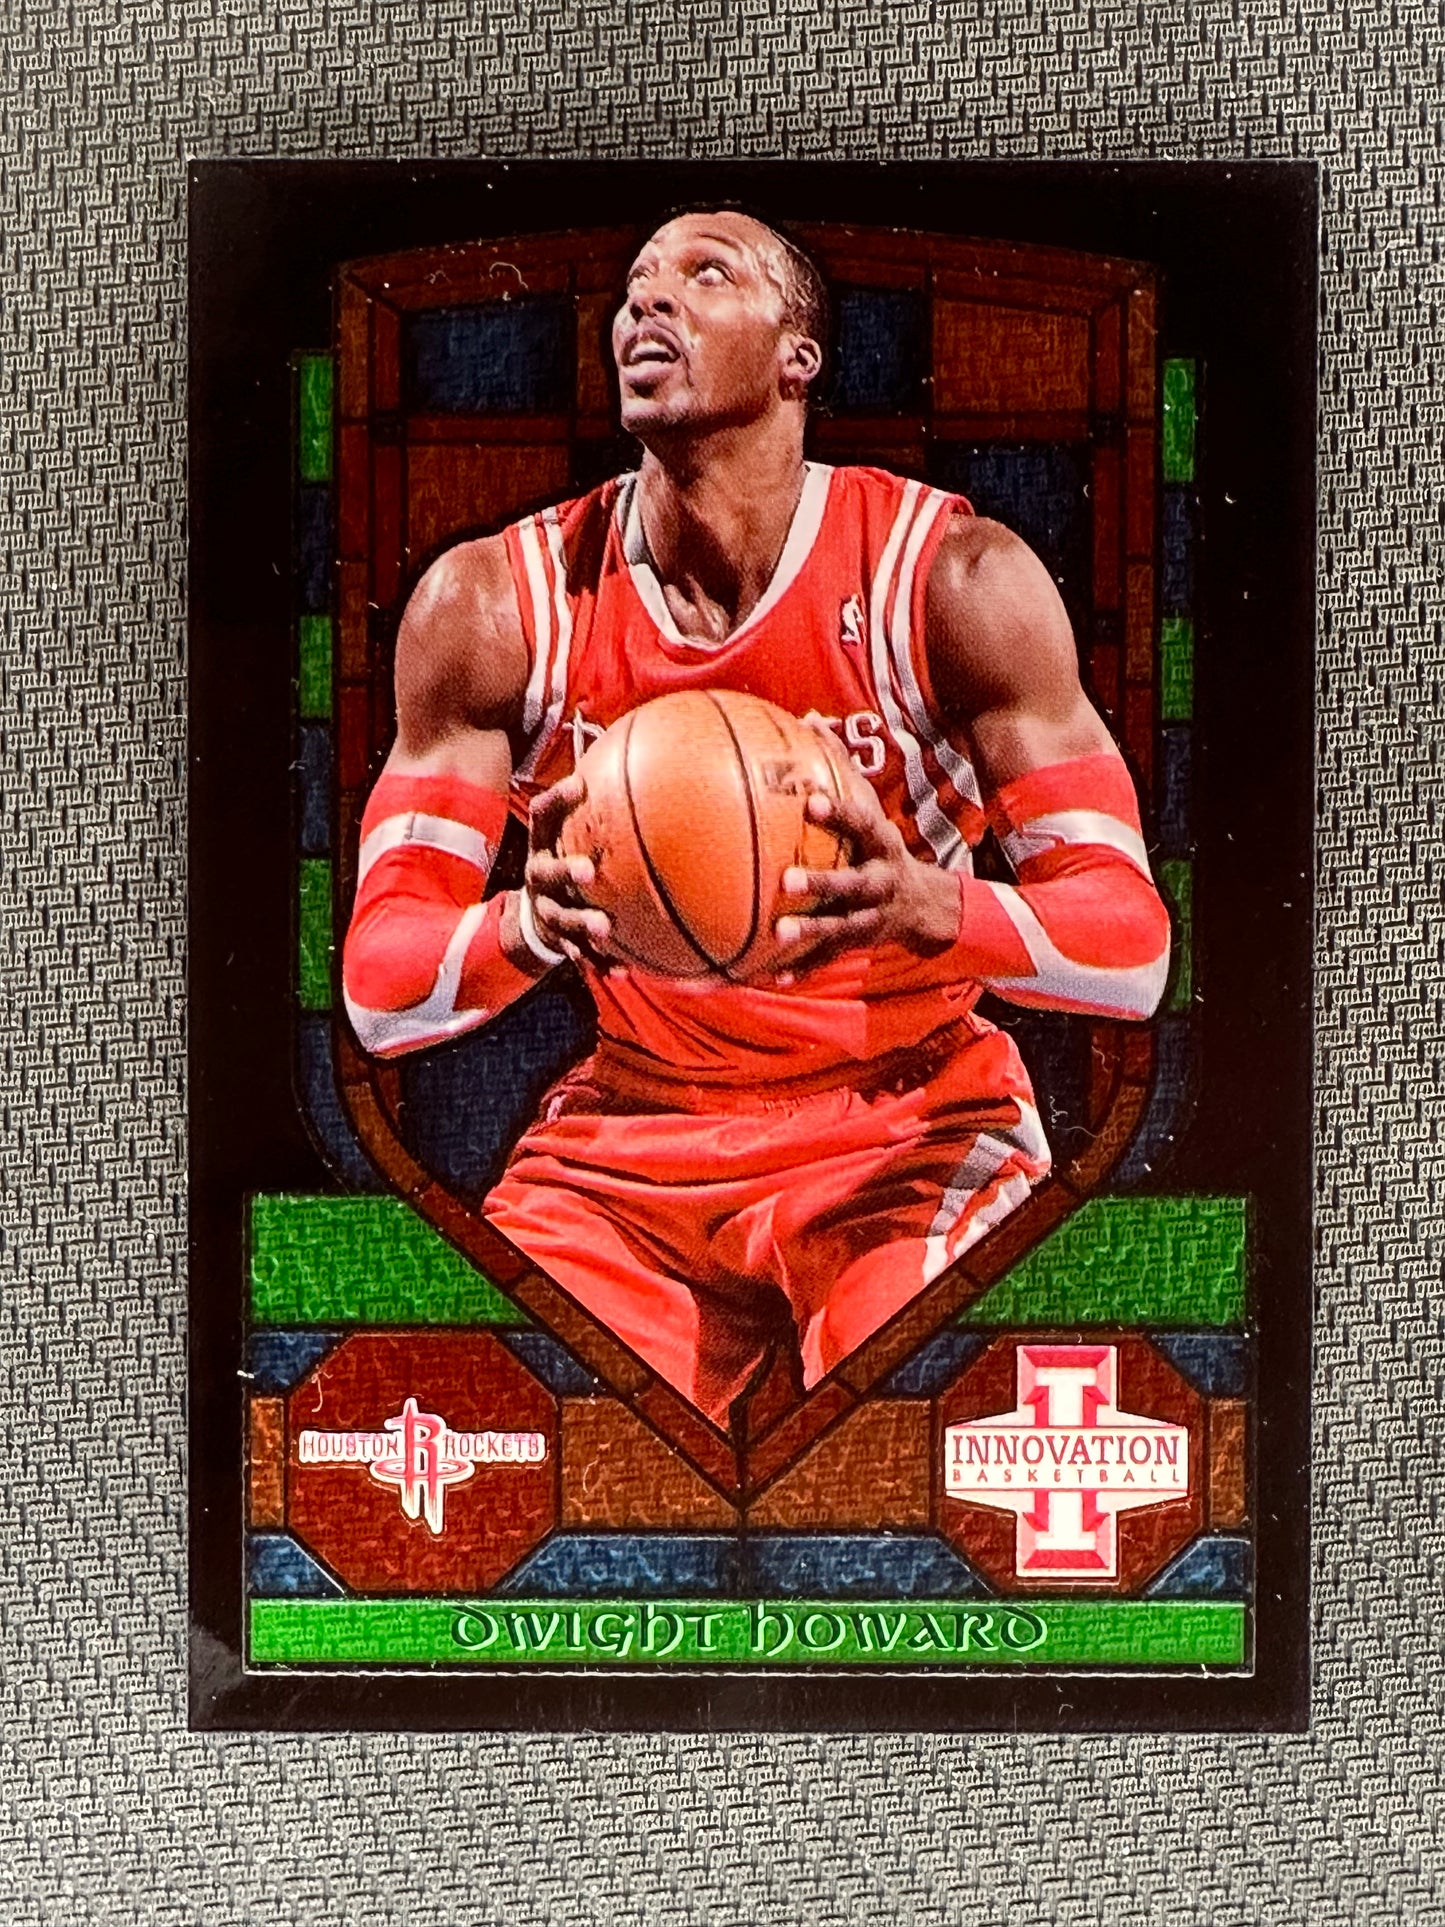 2013/14 Panini Innovation #25 Dwight Howard Stained Glass SSP